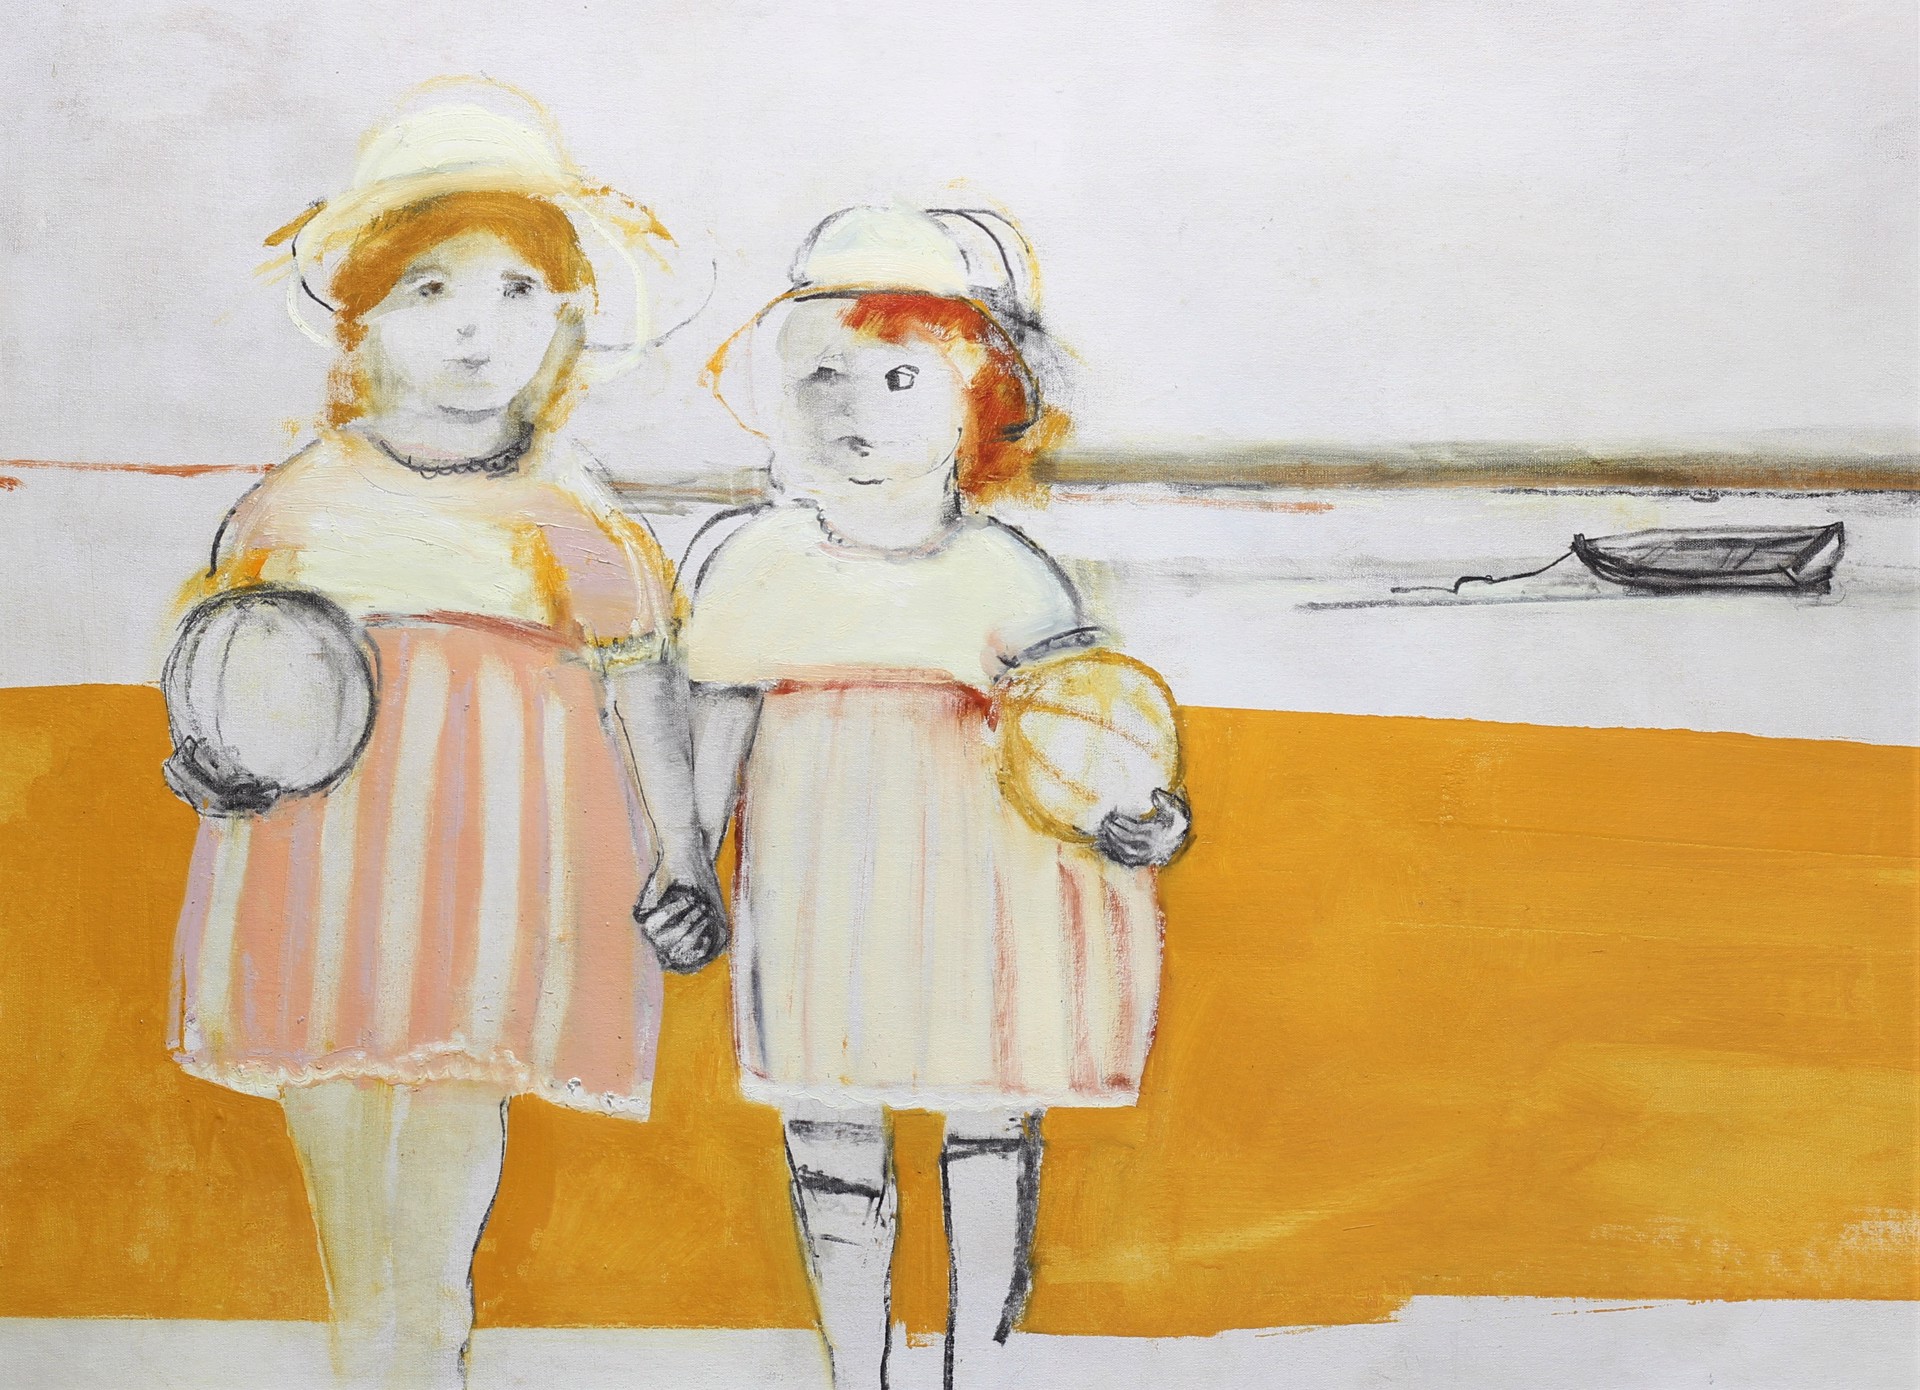 SISTERS AT THE BEACH by CHRISTINA THWAITES (Figures)